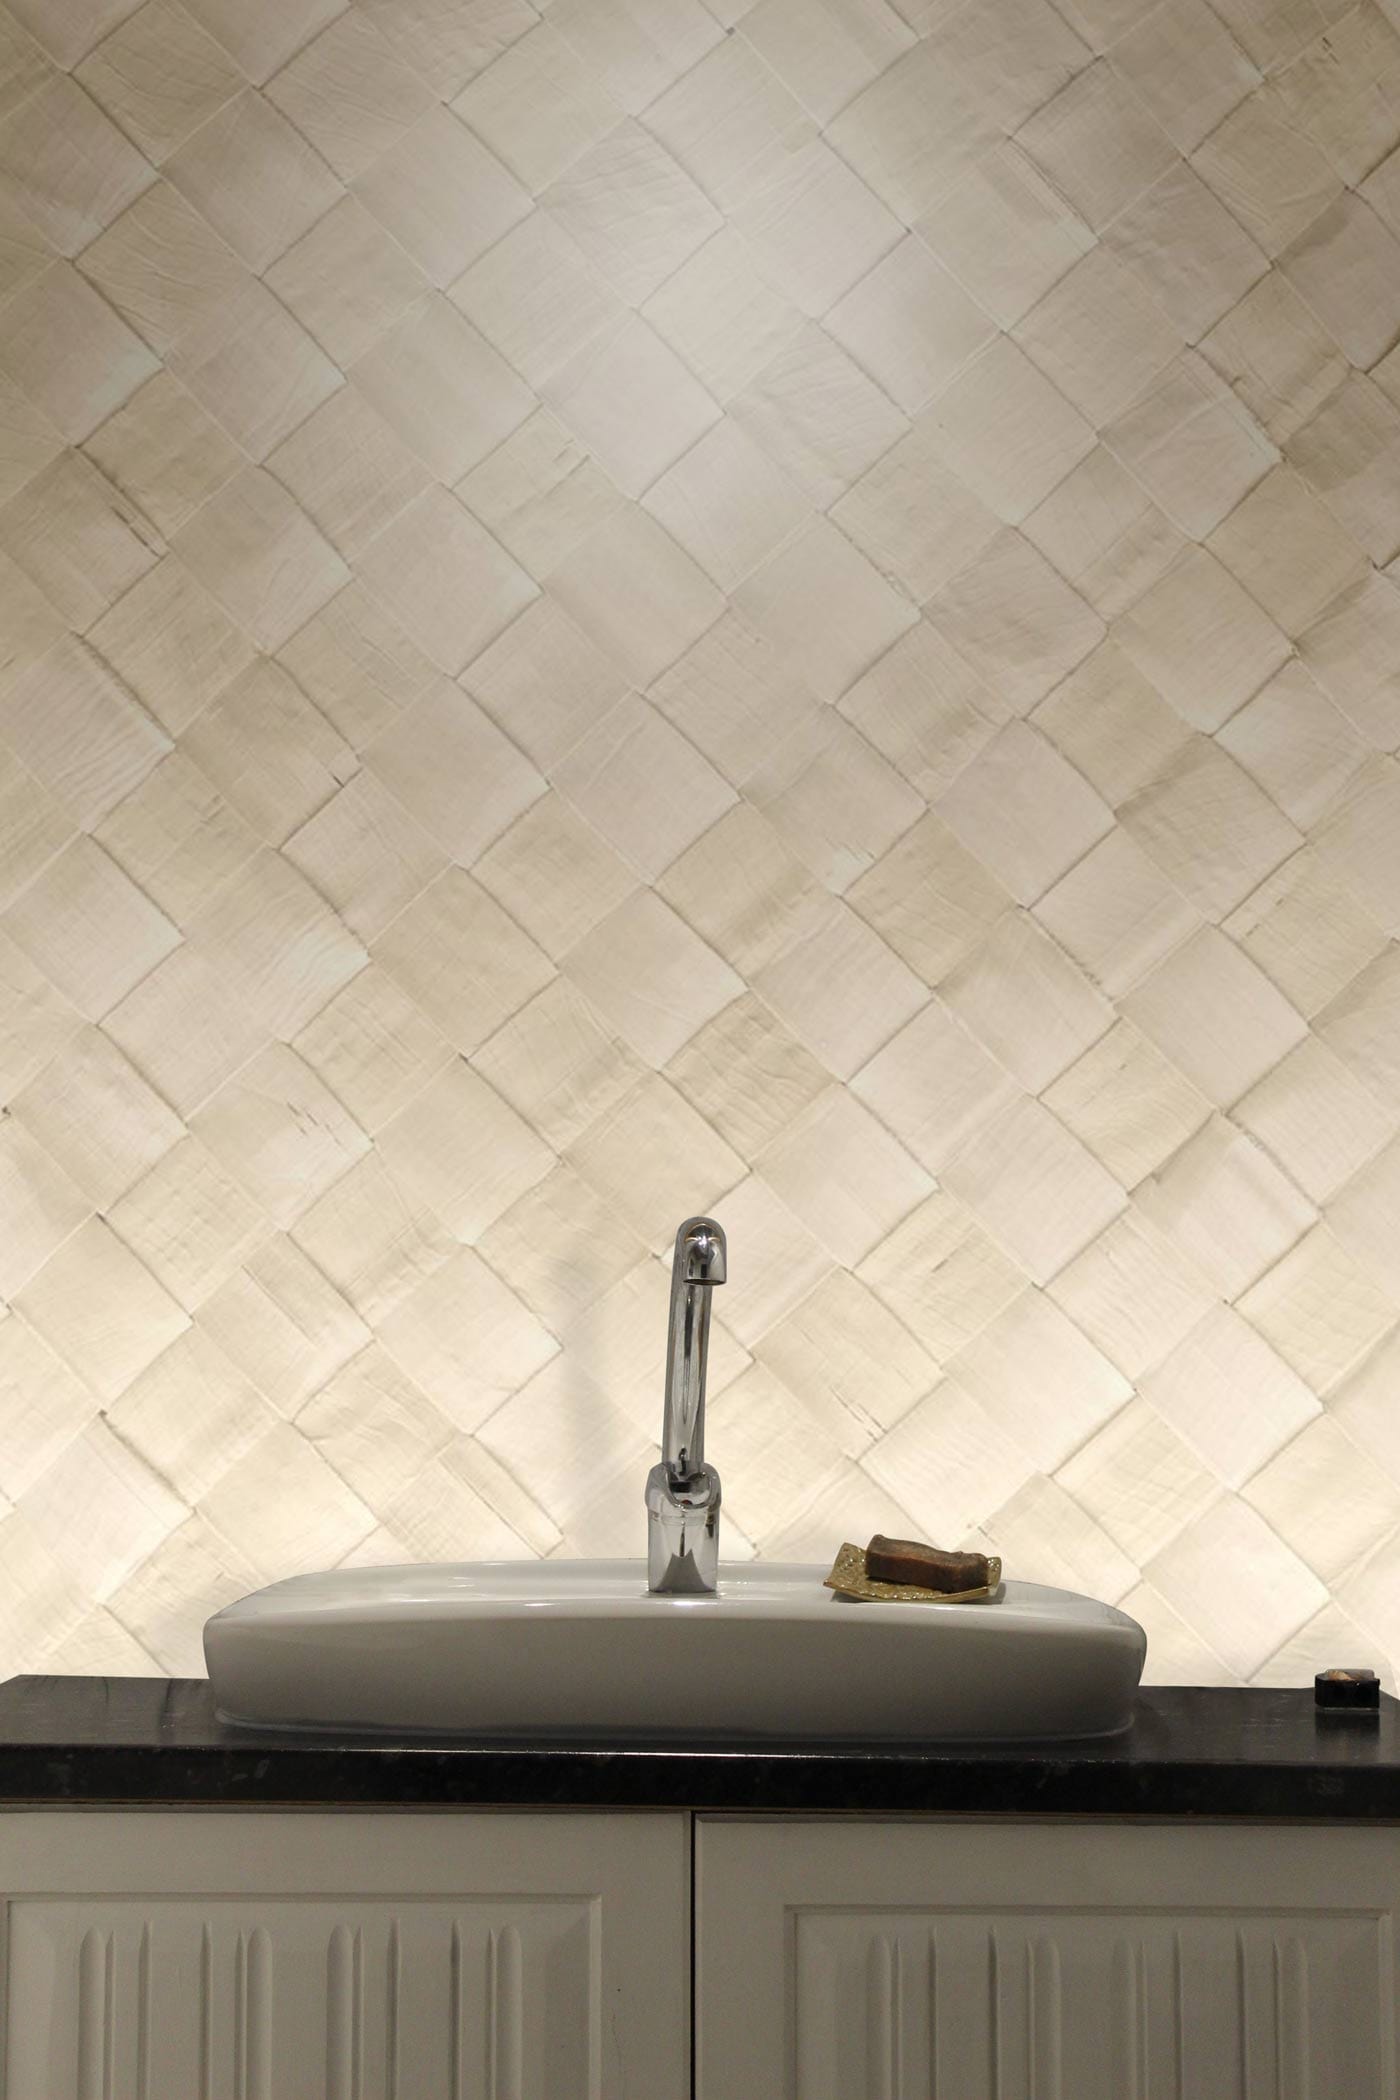 Bathroom Wallpaper in a Flax Mat Pattern with a Mural